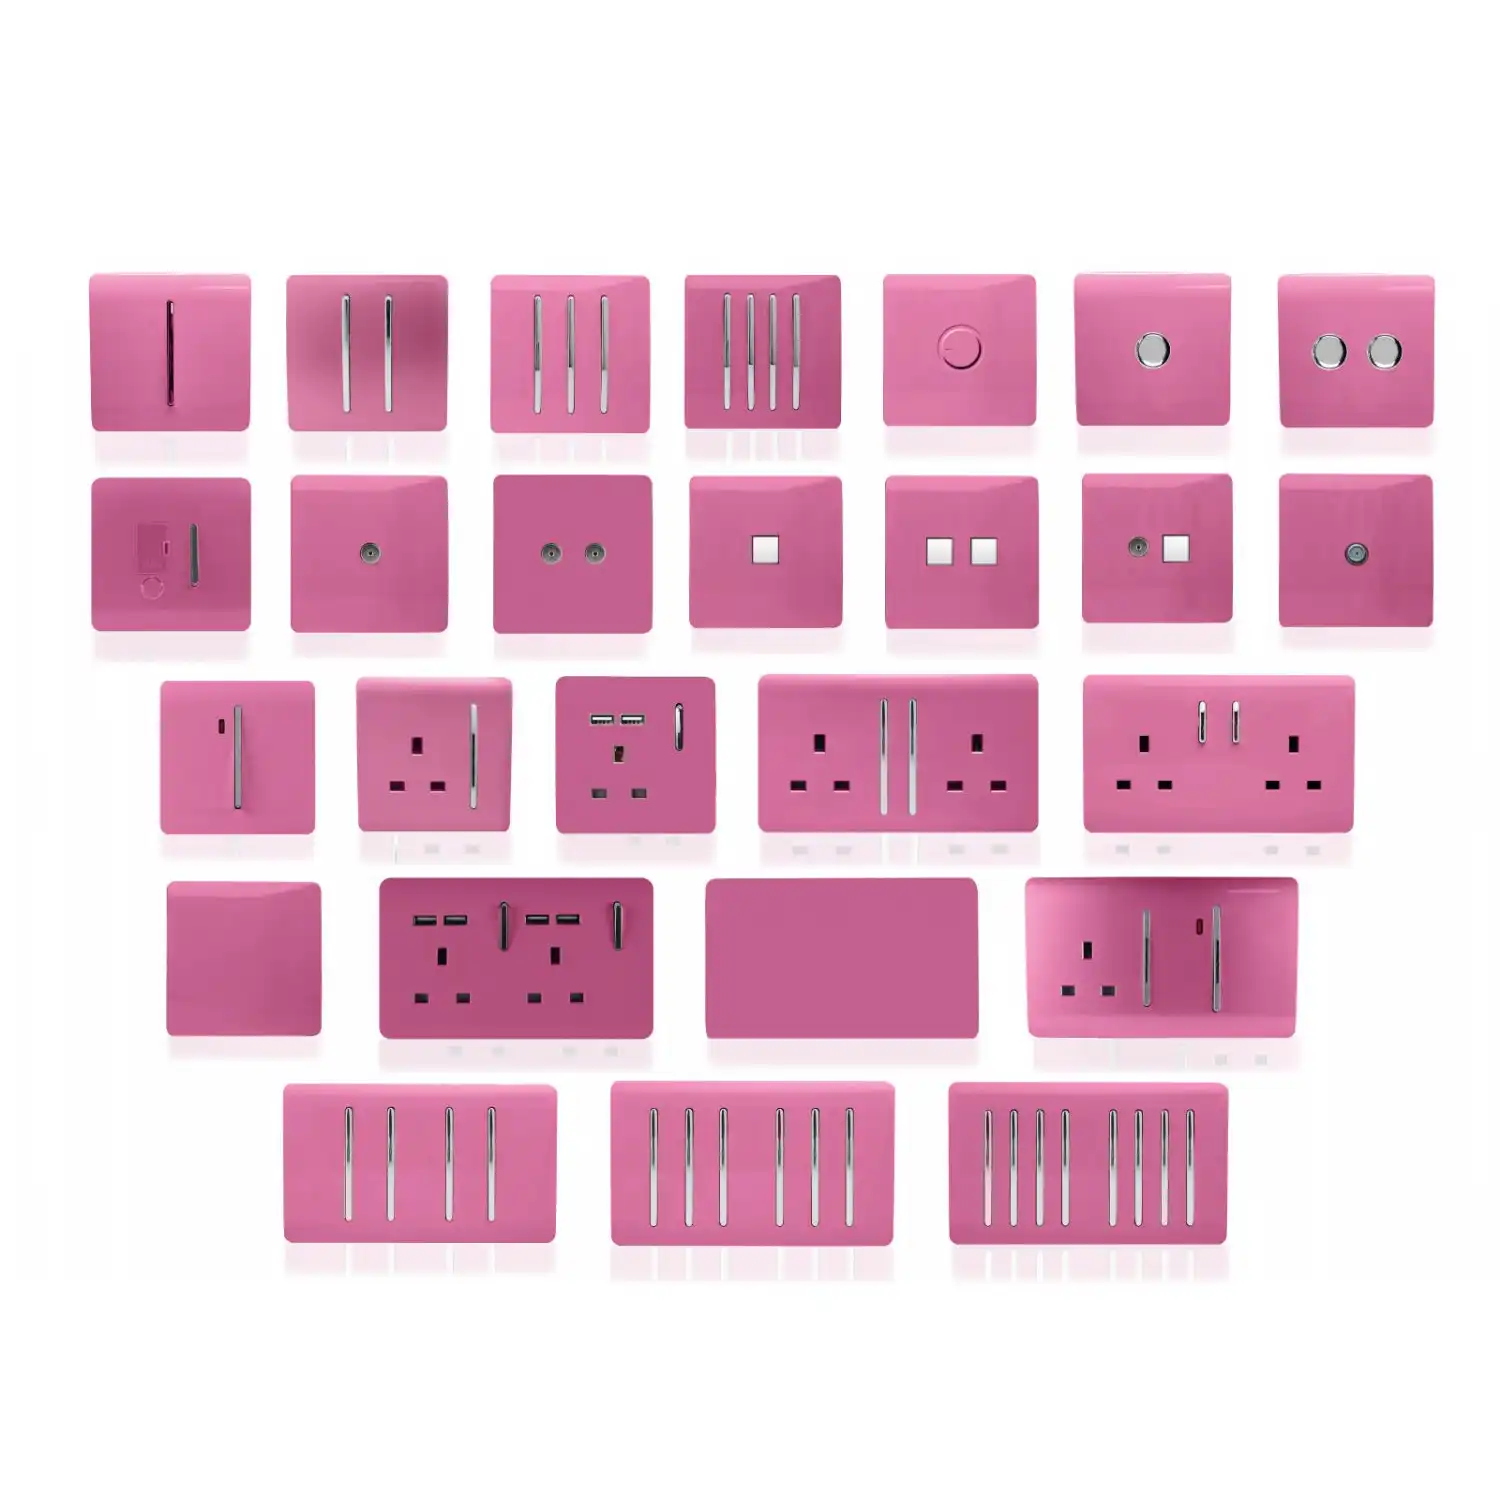 Trendi, Artistic Modern 1 Gang 13Amp Switched Socket Pink Finish, BRITISH MADE, (25mm Back Box Required), 5yrs Warranty